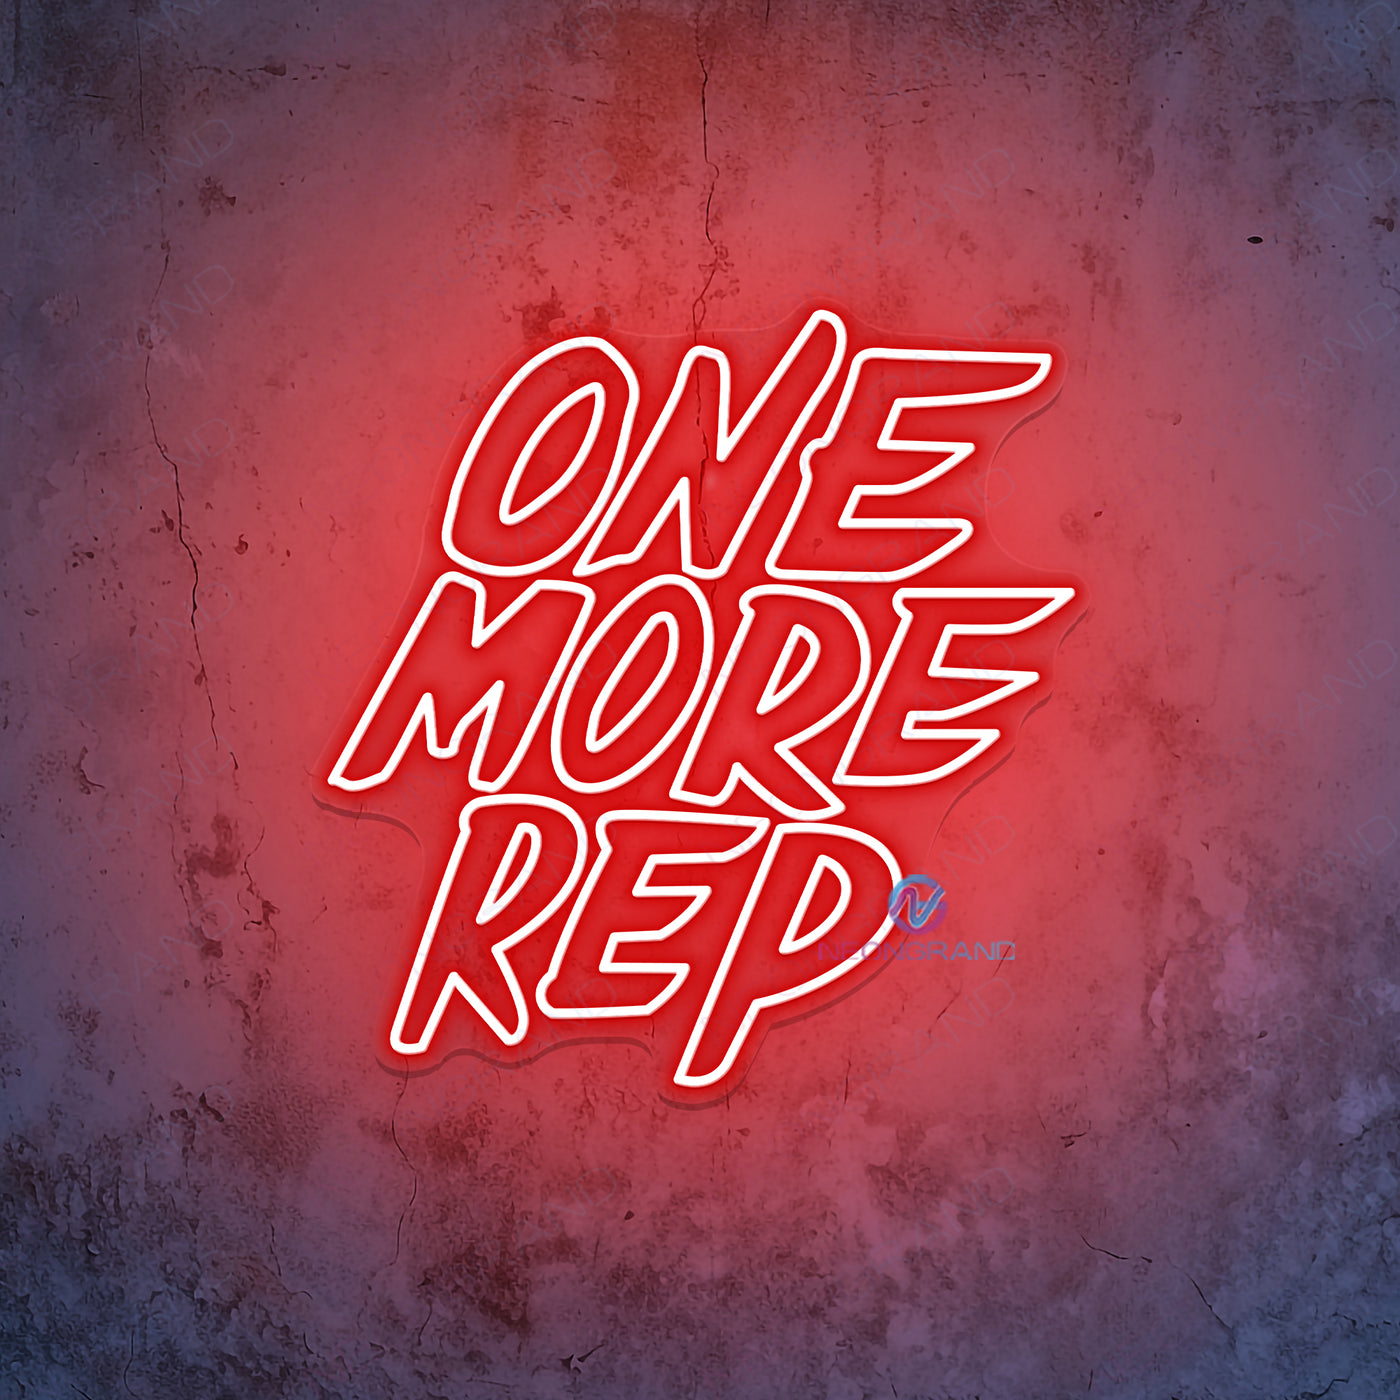 One More Rep Neon Sign Gym Led Light